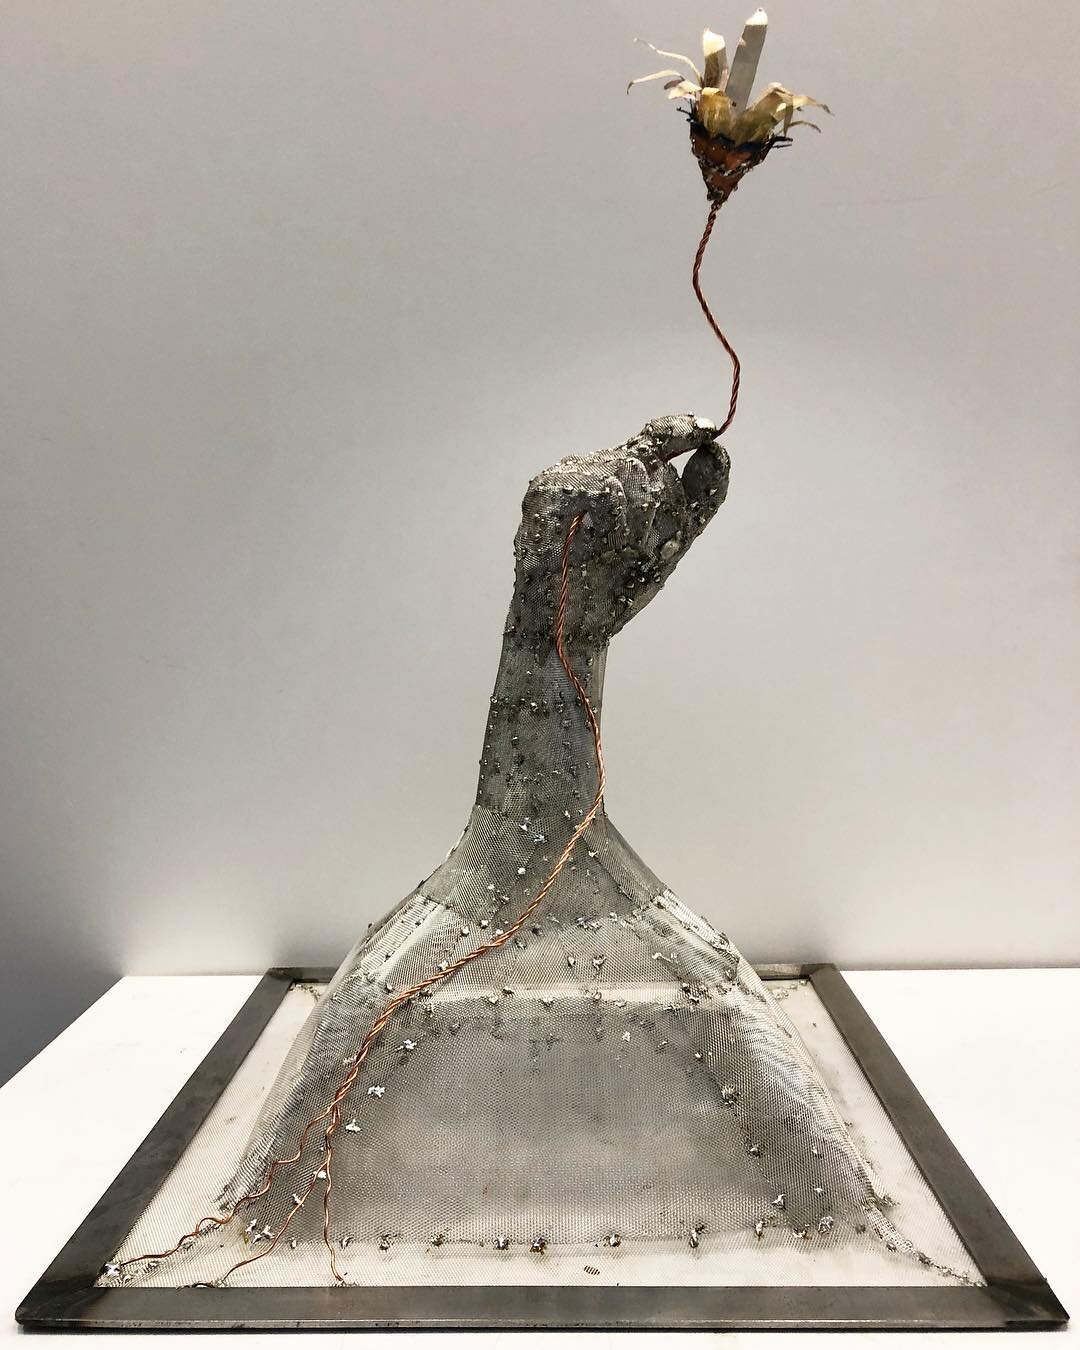 &quot;Reclamation&quot; 
Aluminum wire mesh, copper wire mesh, brass wire mesh, solder, steel.
This is from a workshop at @iffinc (International Flavors and Fragrances) for our Man and Beast class with @wadeschuman. We each took home an unlabelled fr